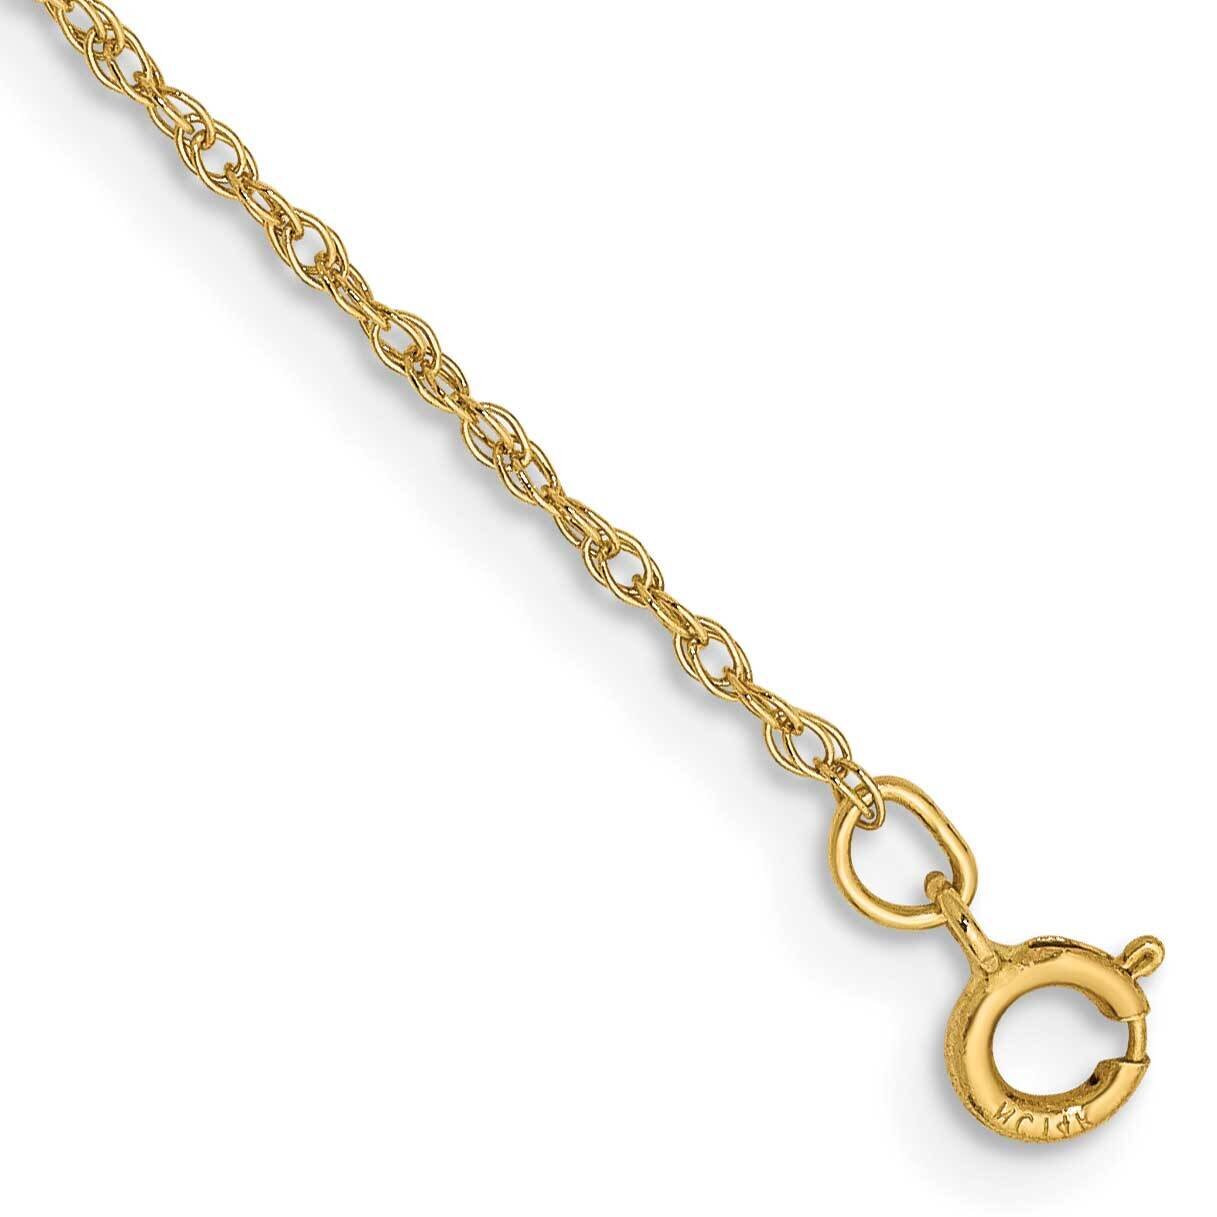 6 Inch .8mm Light Baby Rope with Spring Ring Clasp Chain 14k Gold PEN3-6